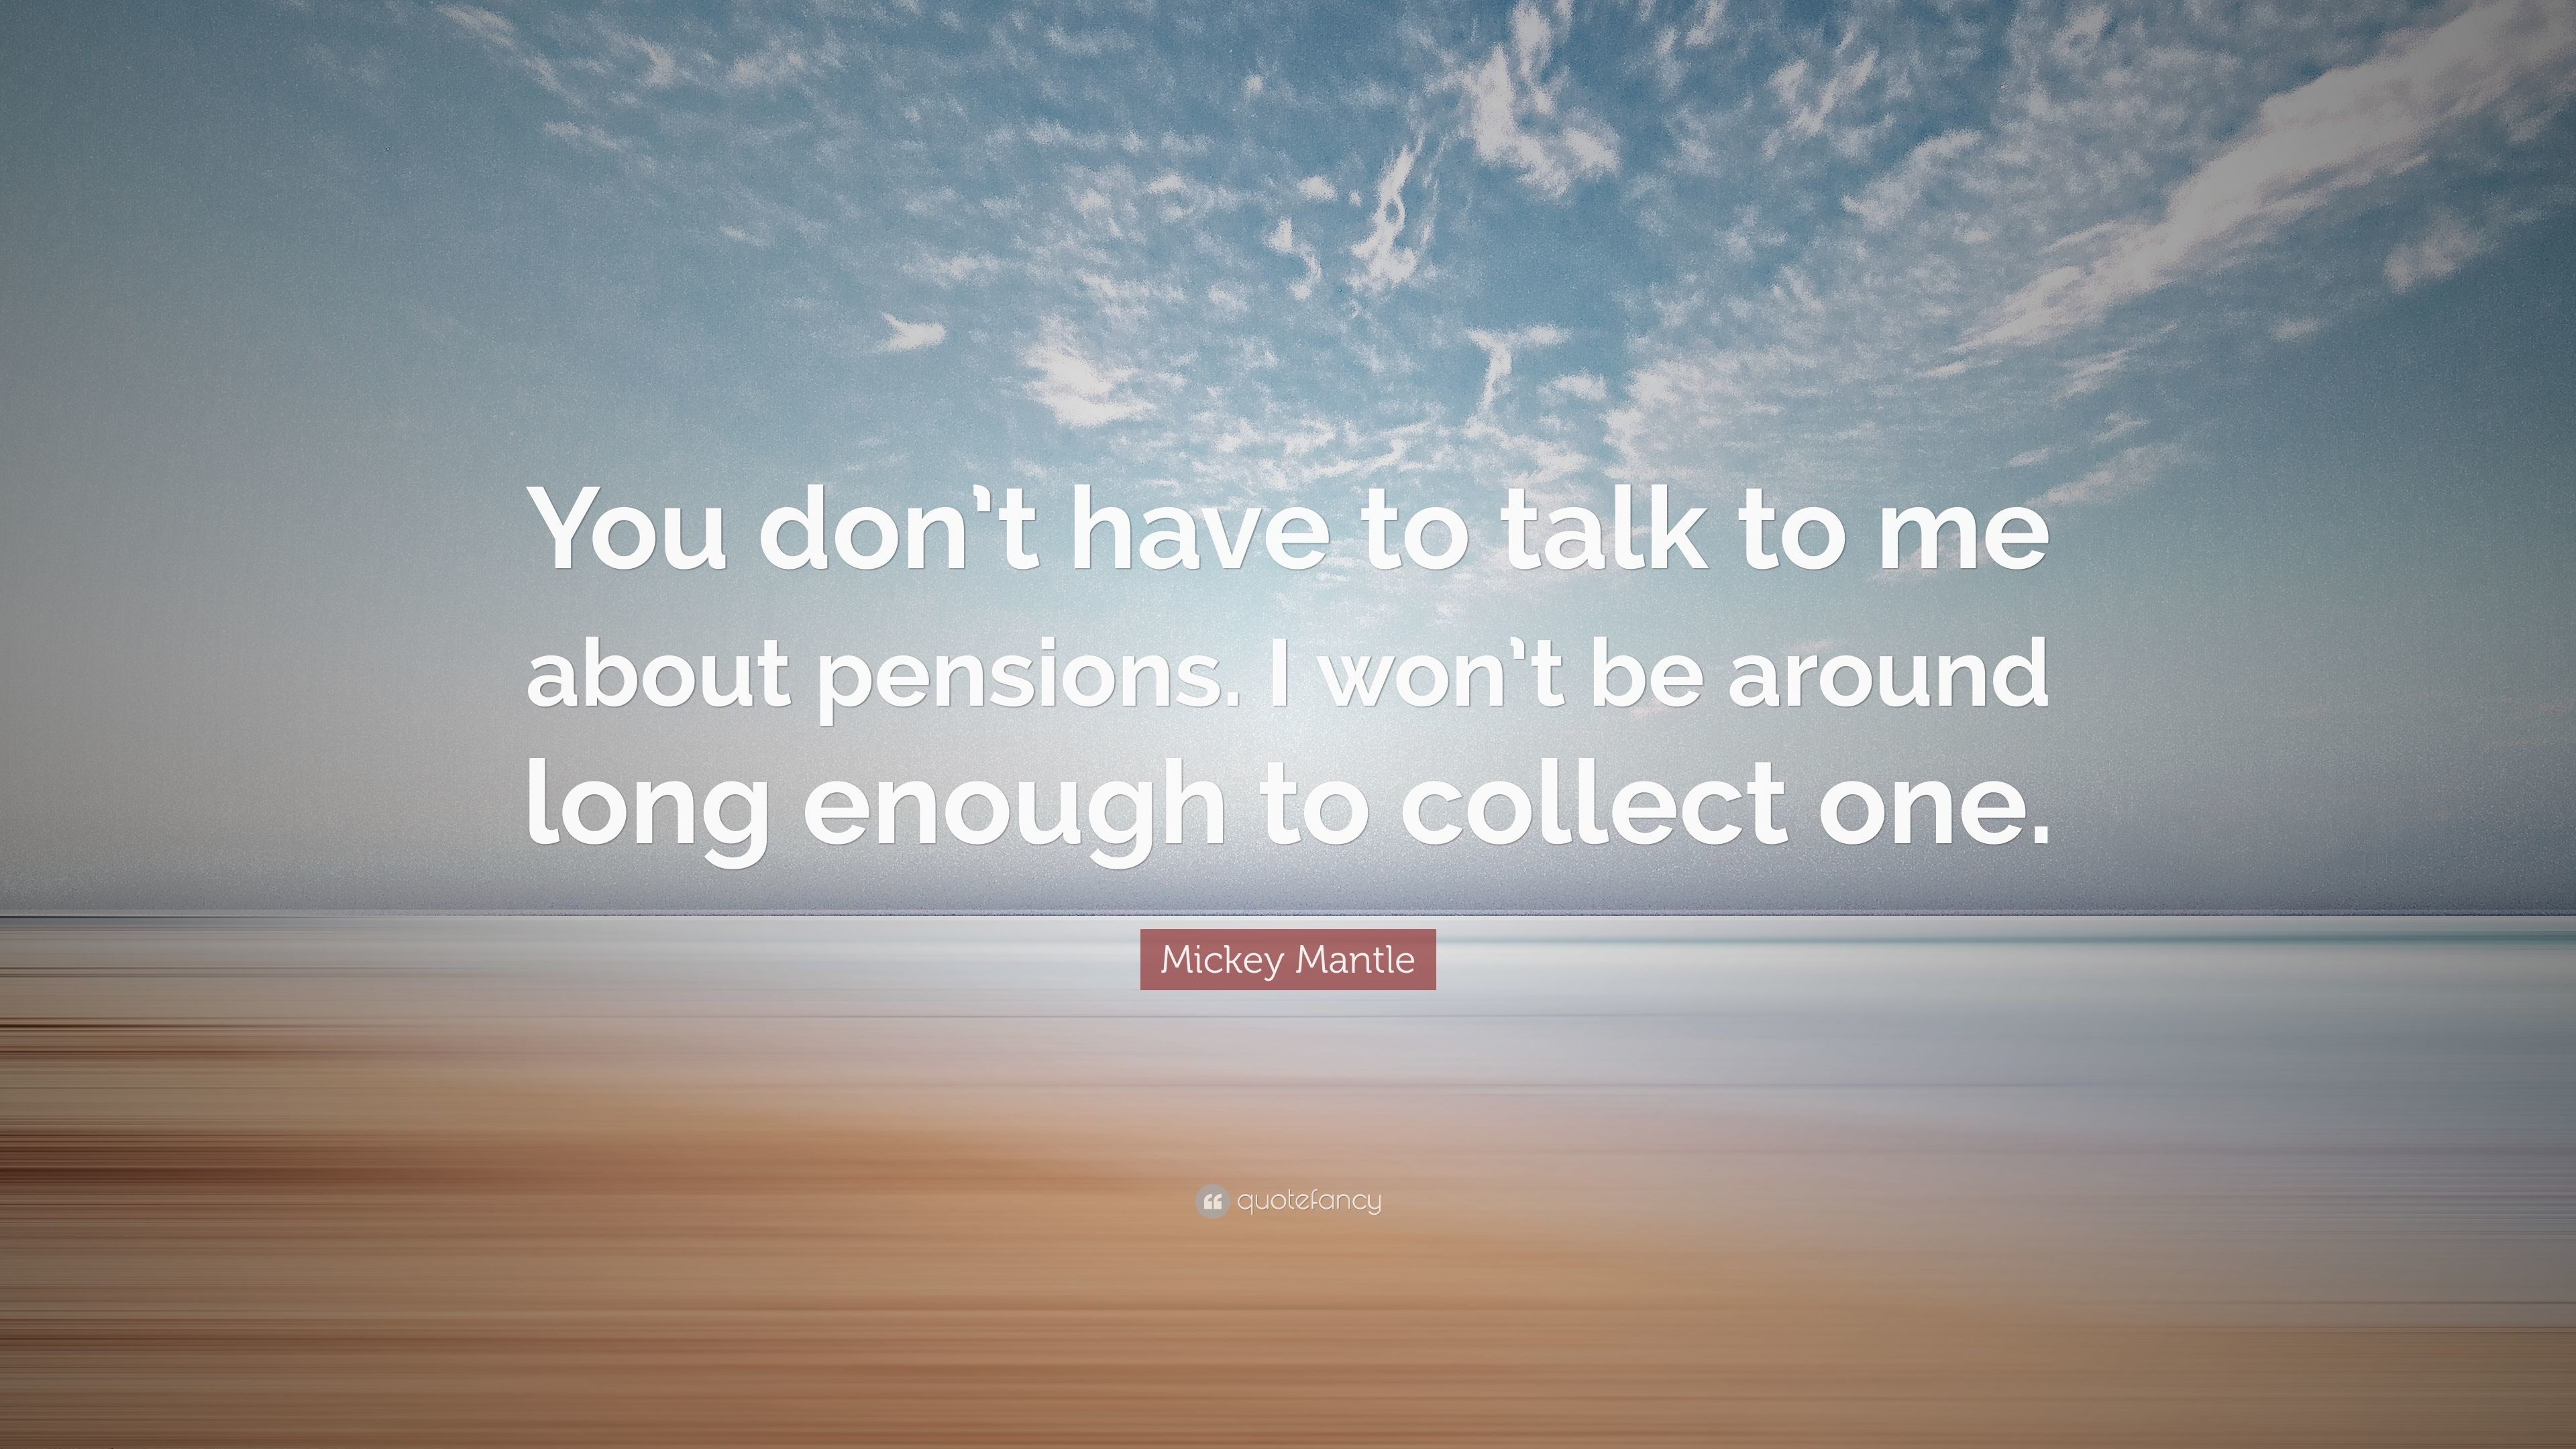 Mickey Mantle Quote You dont have to talk to me about pensions